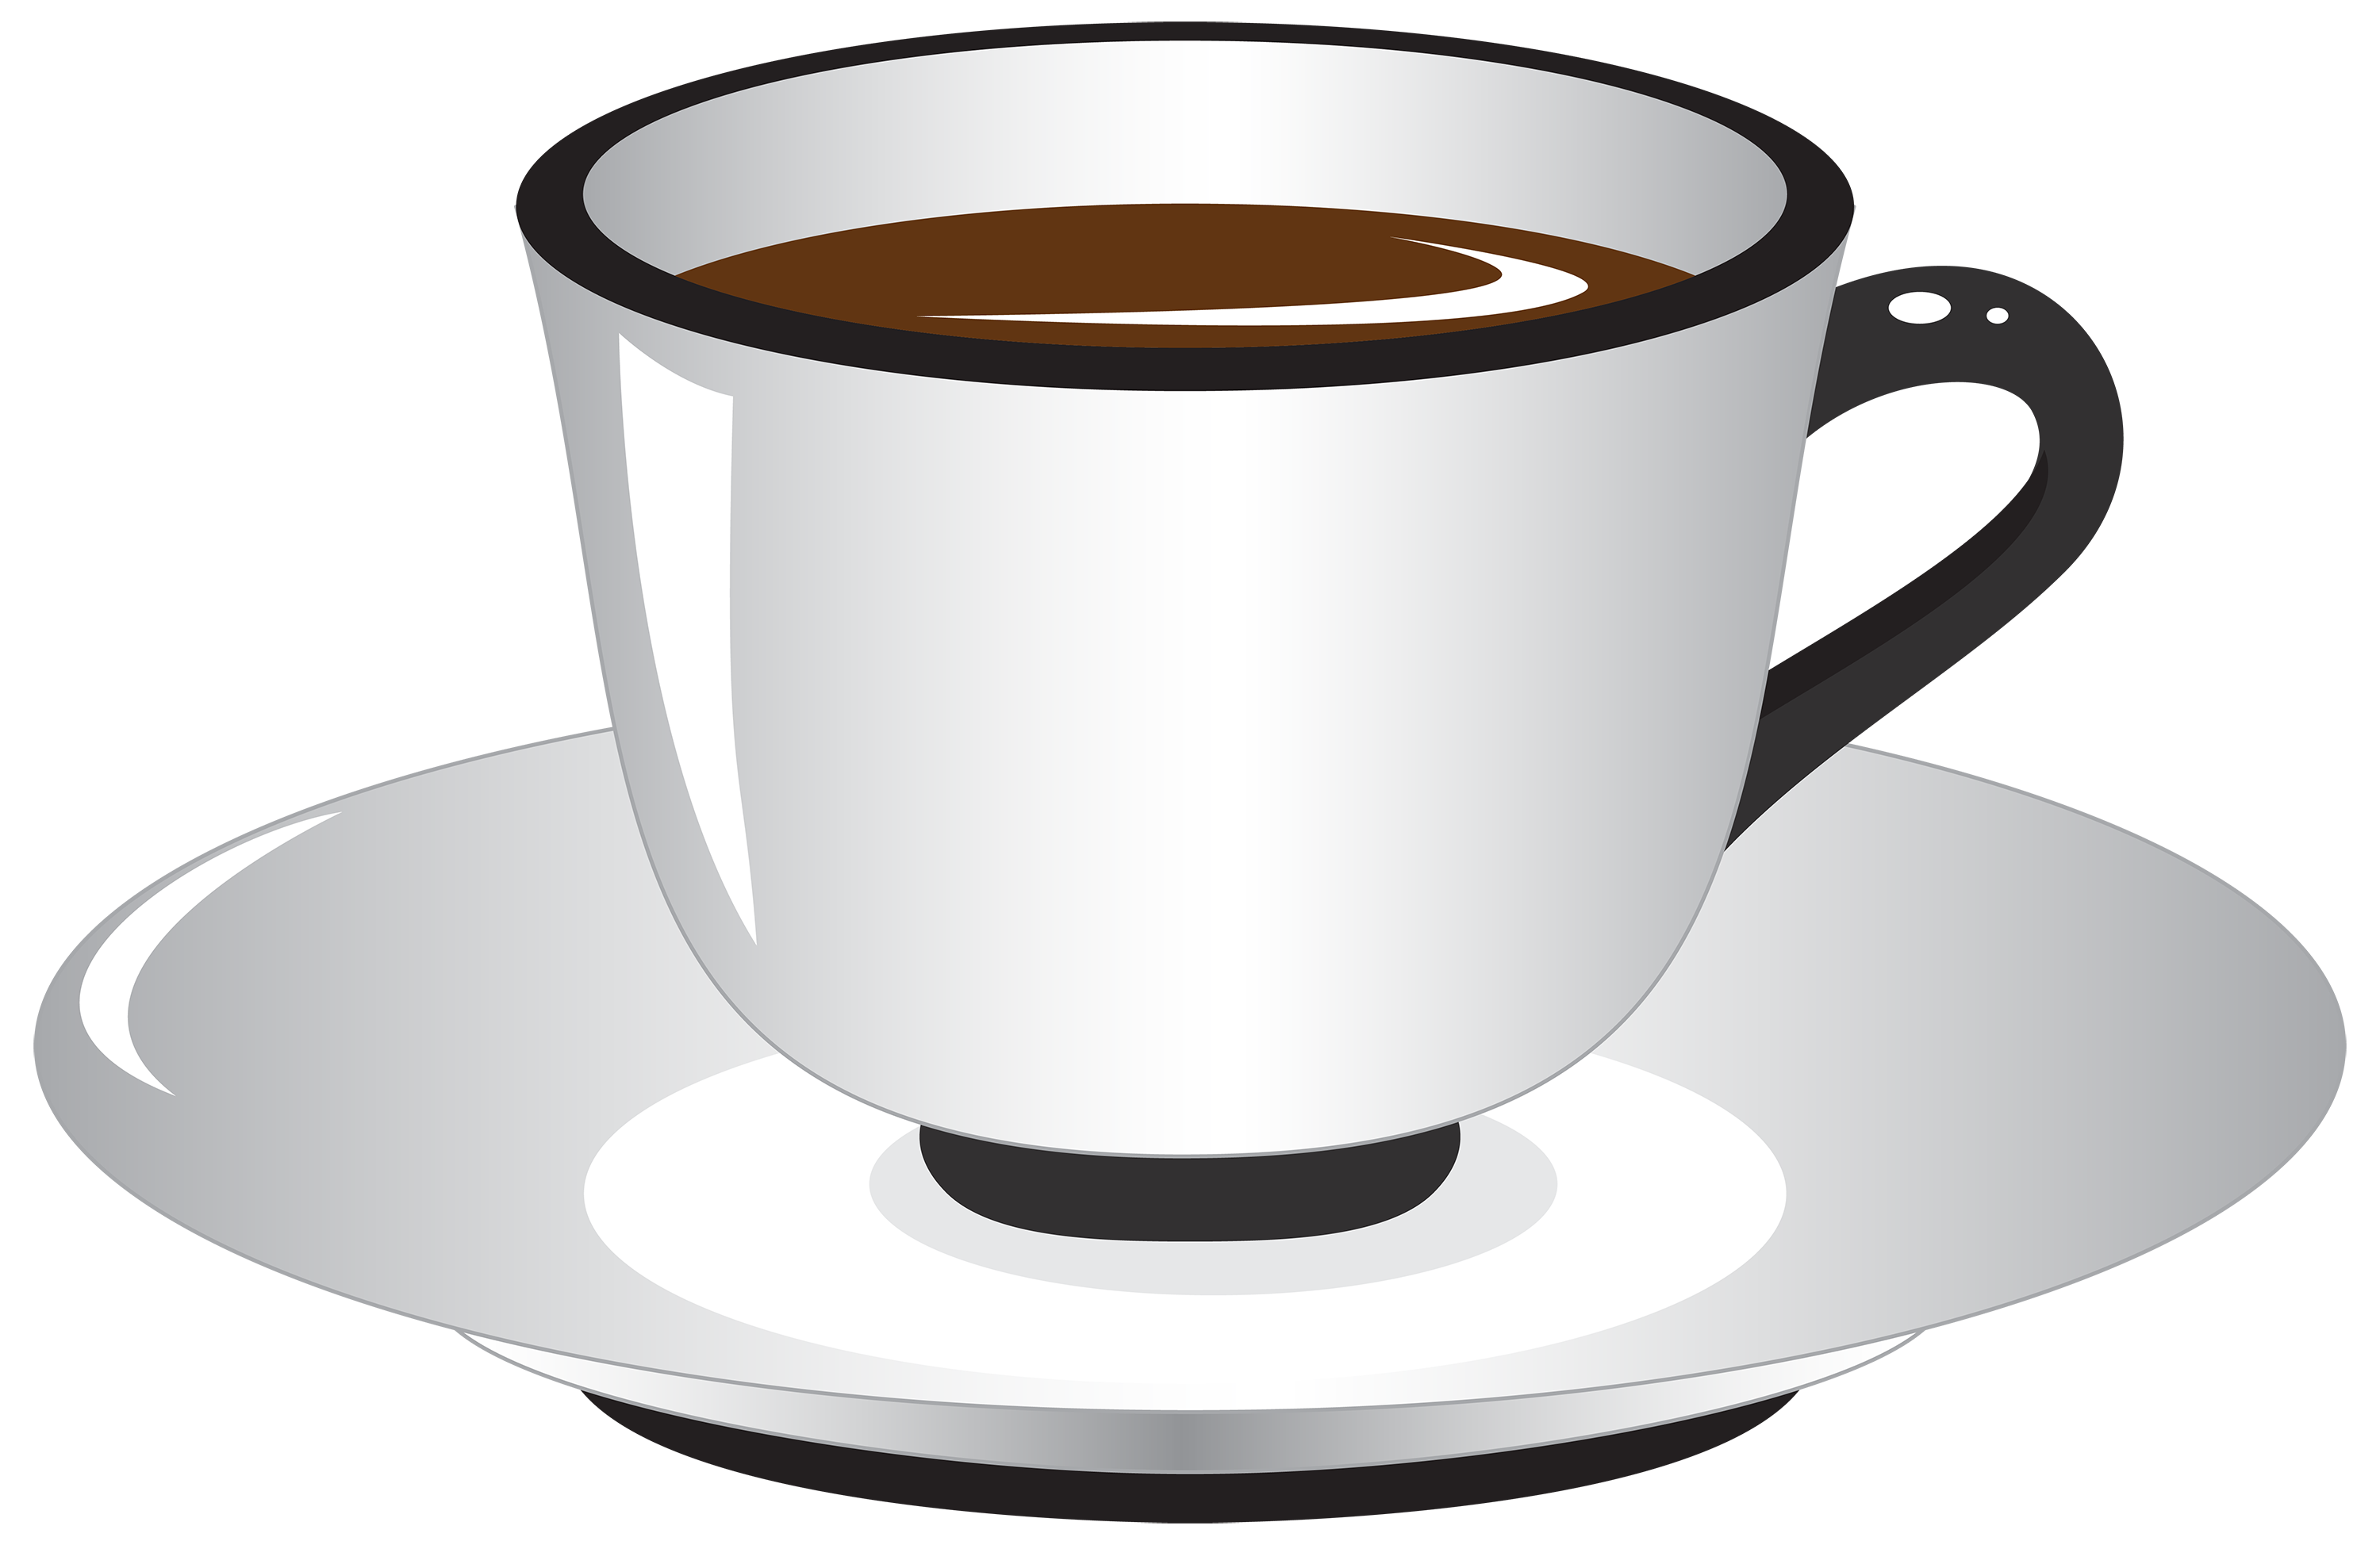 https://pics.clipartpng.com/White_and_Black_Coffee_Cup_PNG_Clipart-615.png